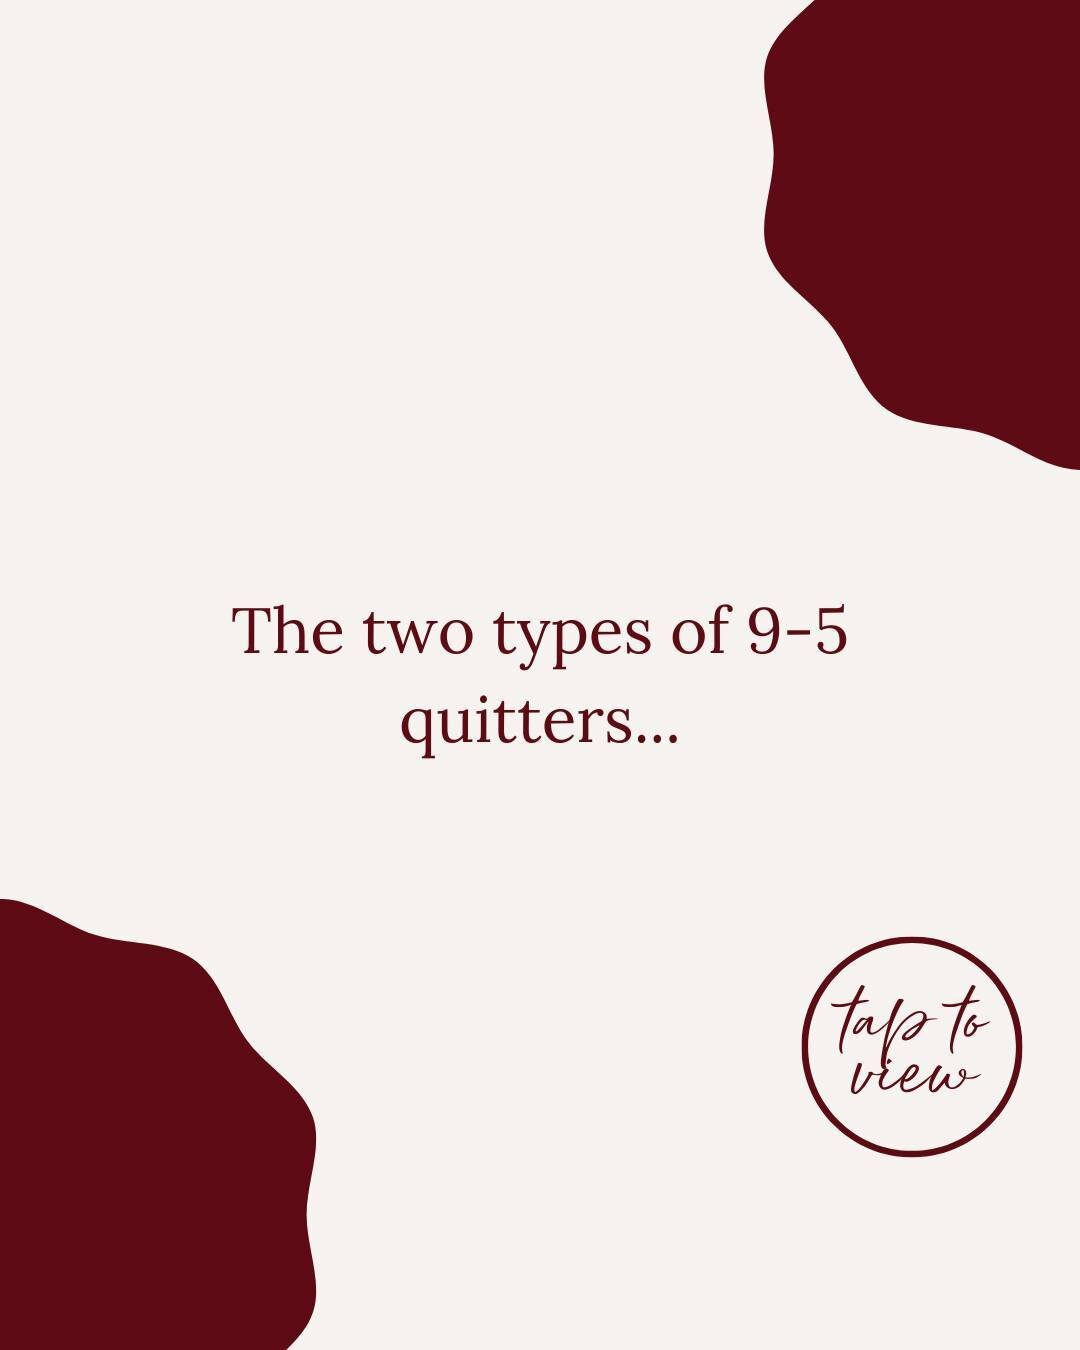 There are two types of 9-to-5 quitters ⬇️⁠
⁠
Which were/are you - I wanna know! ⁠
⁠
➡️ The Leaper⁠
This is the person who doesn&rsquo;t need a safety net. They intuitively know that it&rsquo;s time to quit and while they don&rsquo;t know the details,